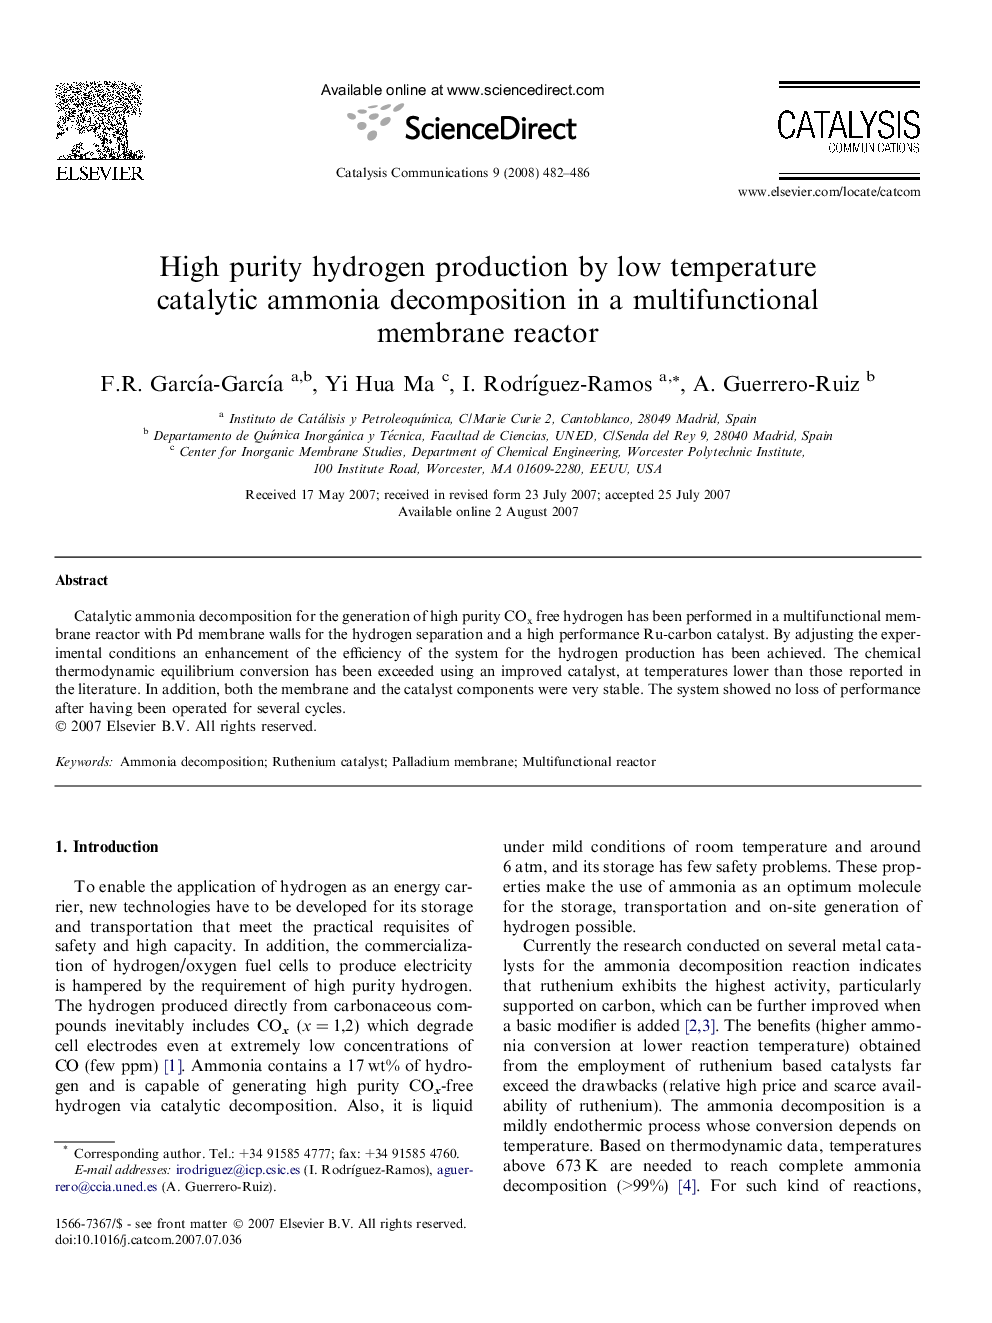 High purity hydrogen production by low temperature catalytic ammonia decomposition in a multifunctional membrane reactor